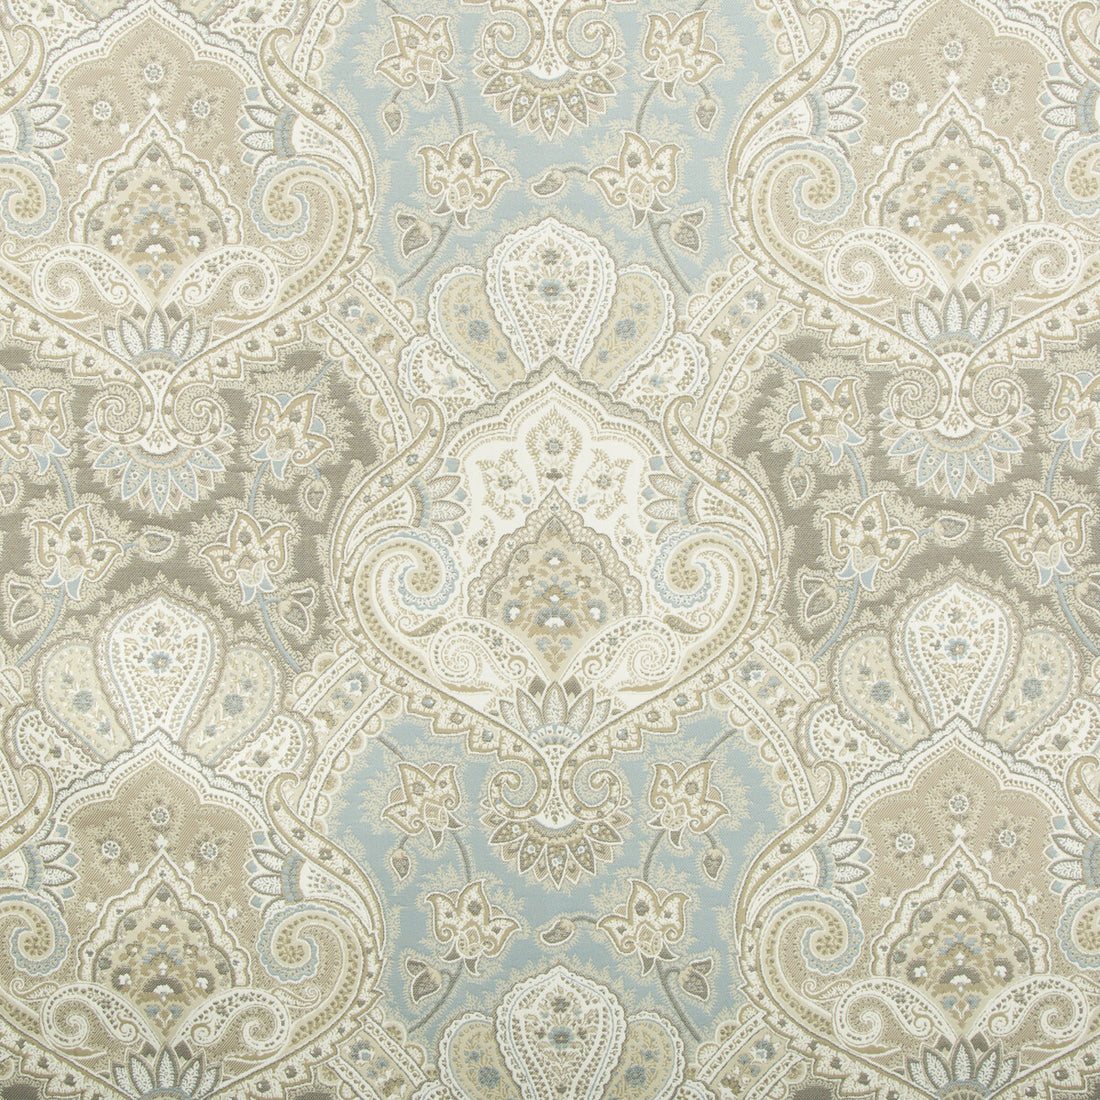 Artemest fabric in flagstone color - pattern 34558.1615.0 - by Kravet Design in the Echo Indoor Outdoor Ibiza collection